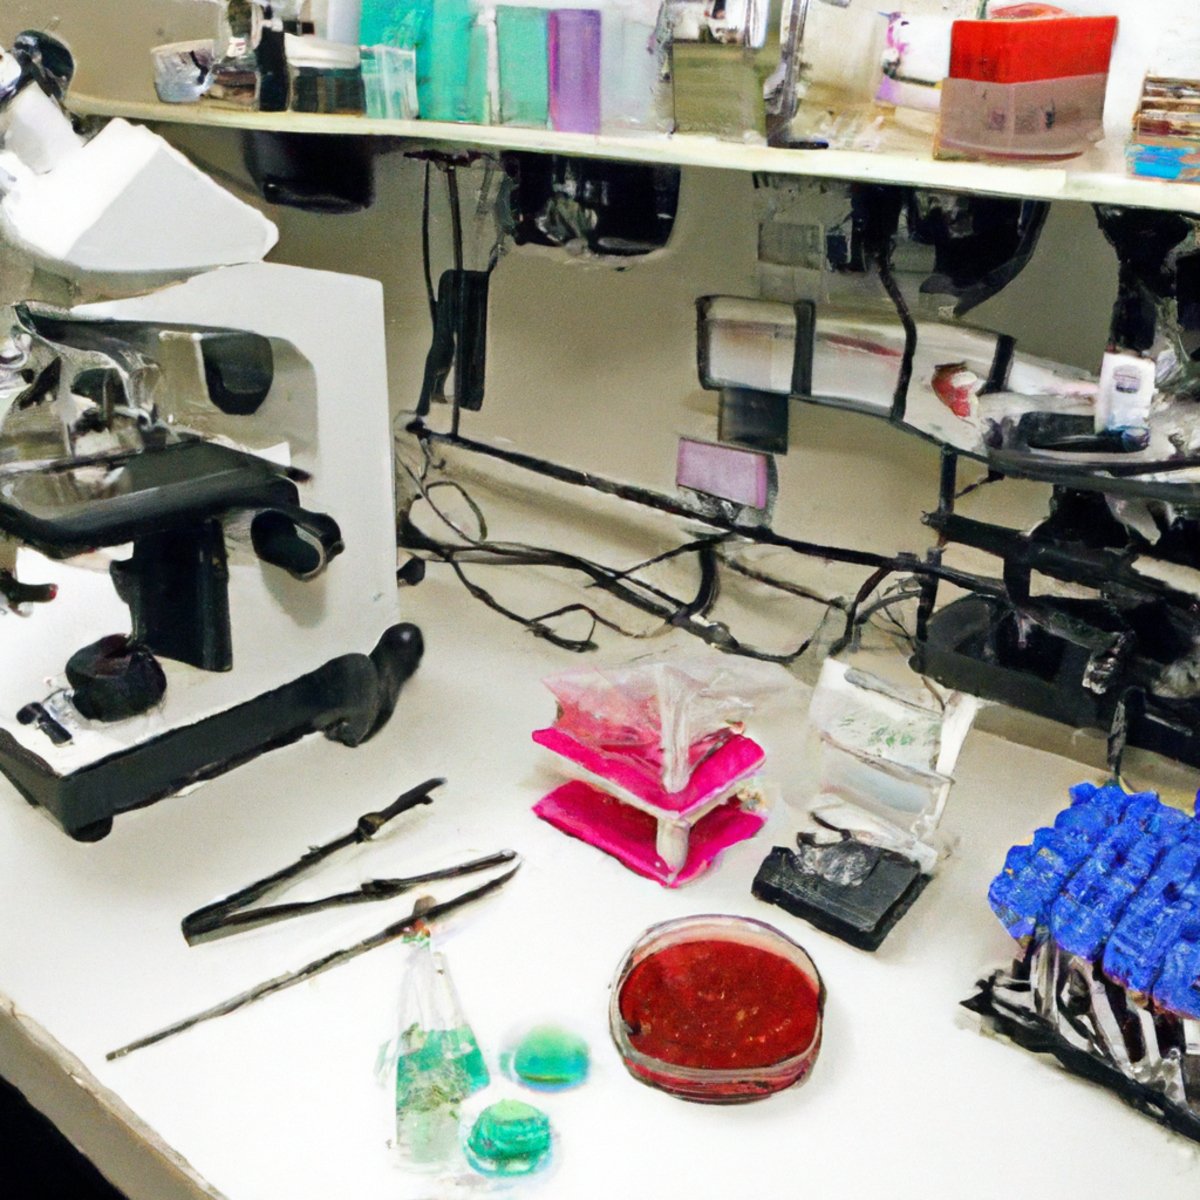 Laboratory scene with scientific instruments, emphasizing dedication and precision in uncovering genetic causes of Gitelman Syndrome.